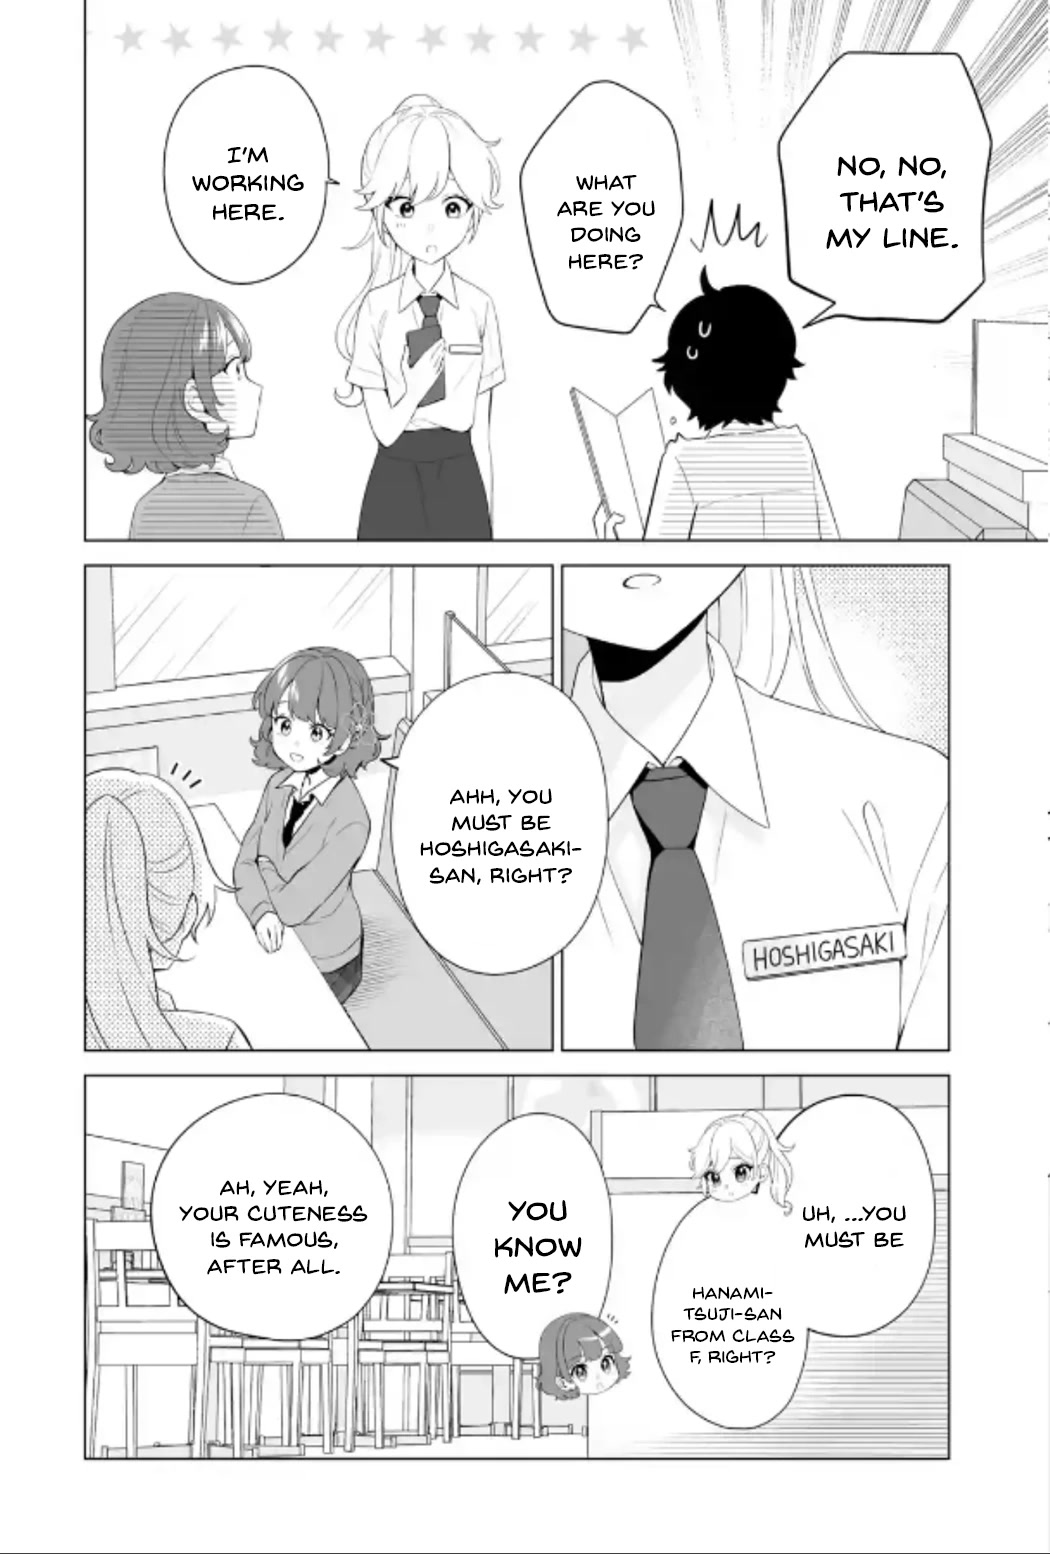 Please Leave Me Alone (For Some Reason, She Wants To Change A Lone Wolf's Helpless High School Life.) - Page 2